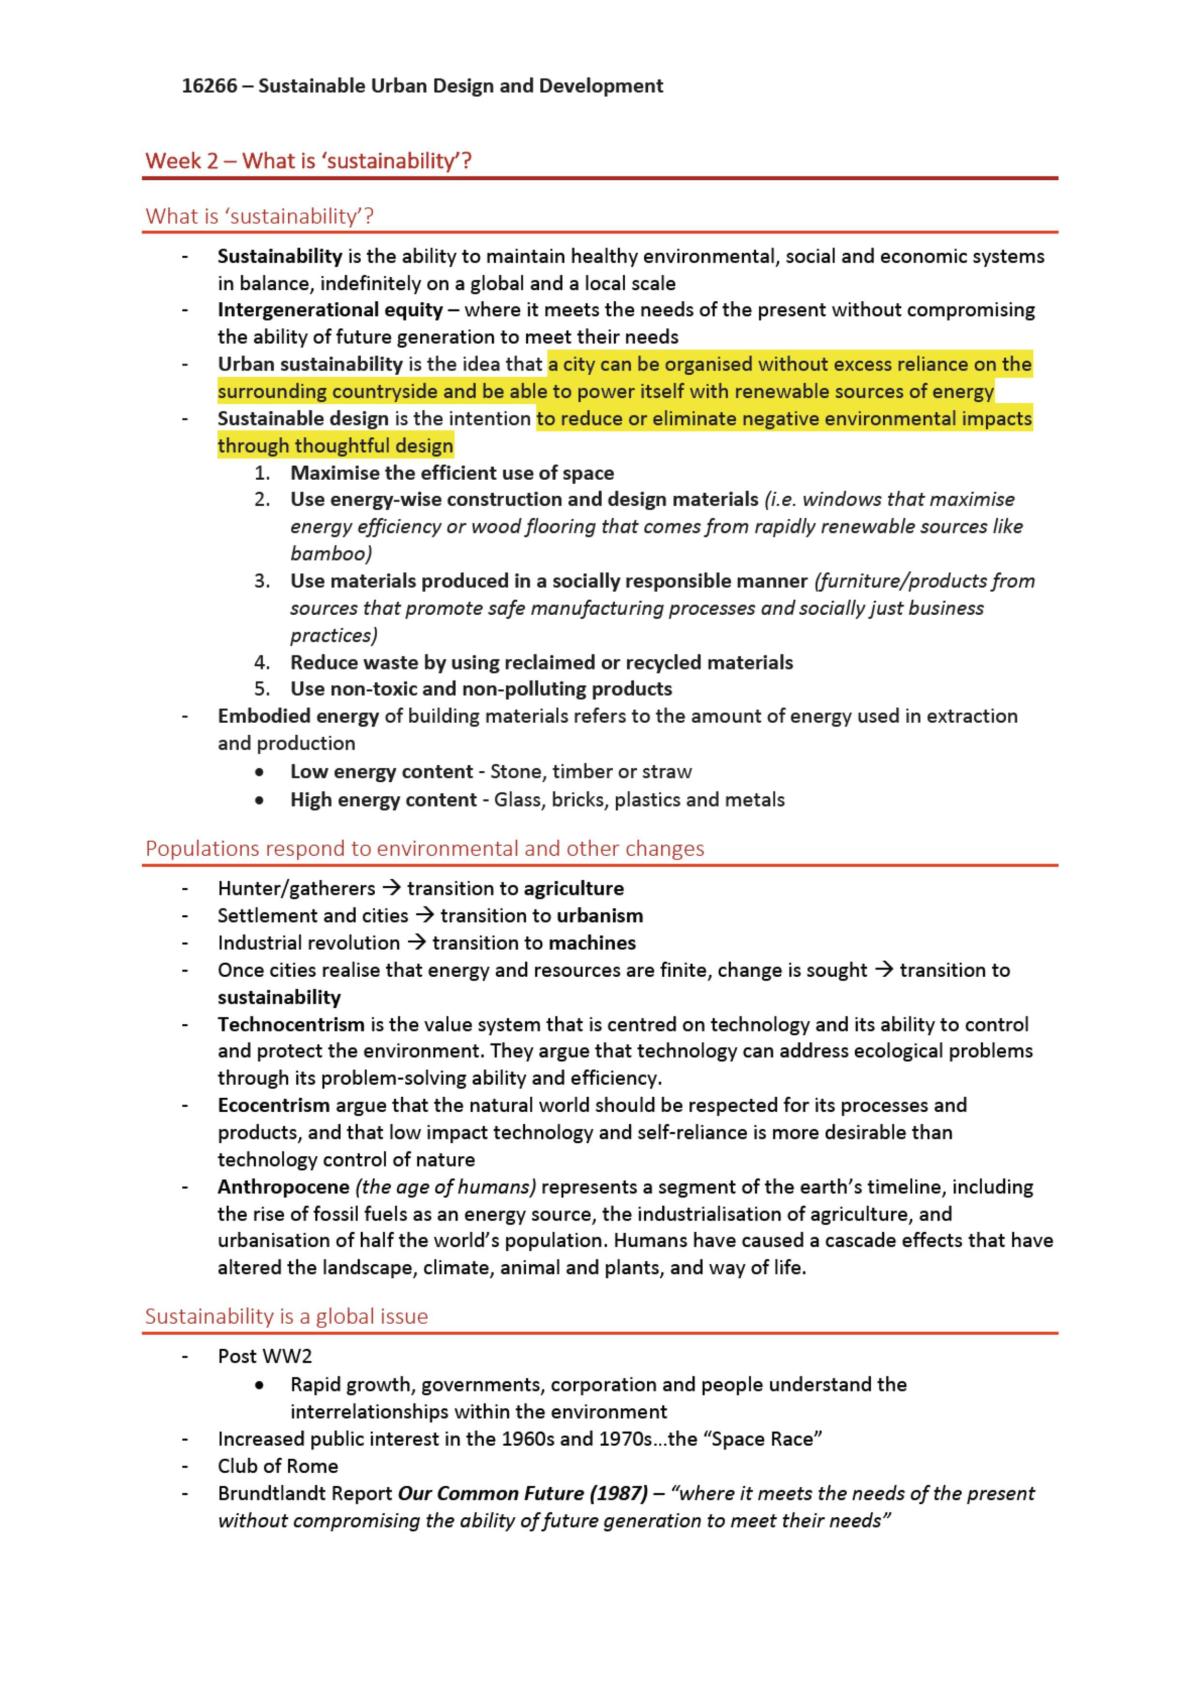 SUDD - Lecture Notes 1-10 - Page 5